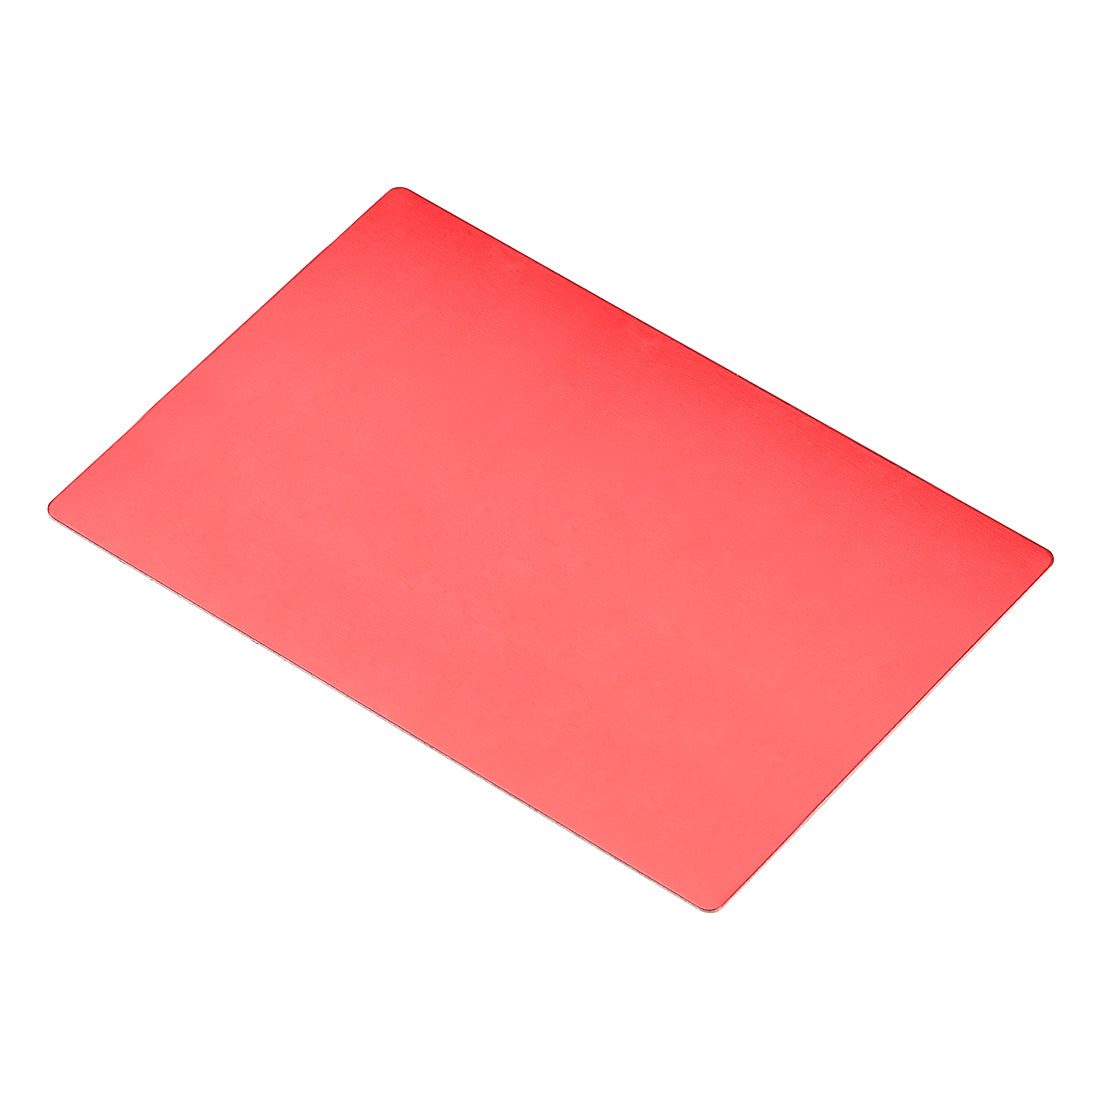 uxcell Uxcell Blank Metal Card Anodized Aluminum Plate for DIY Laser Printing